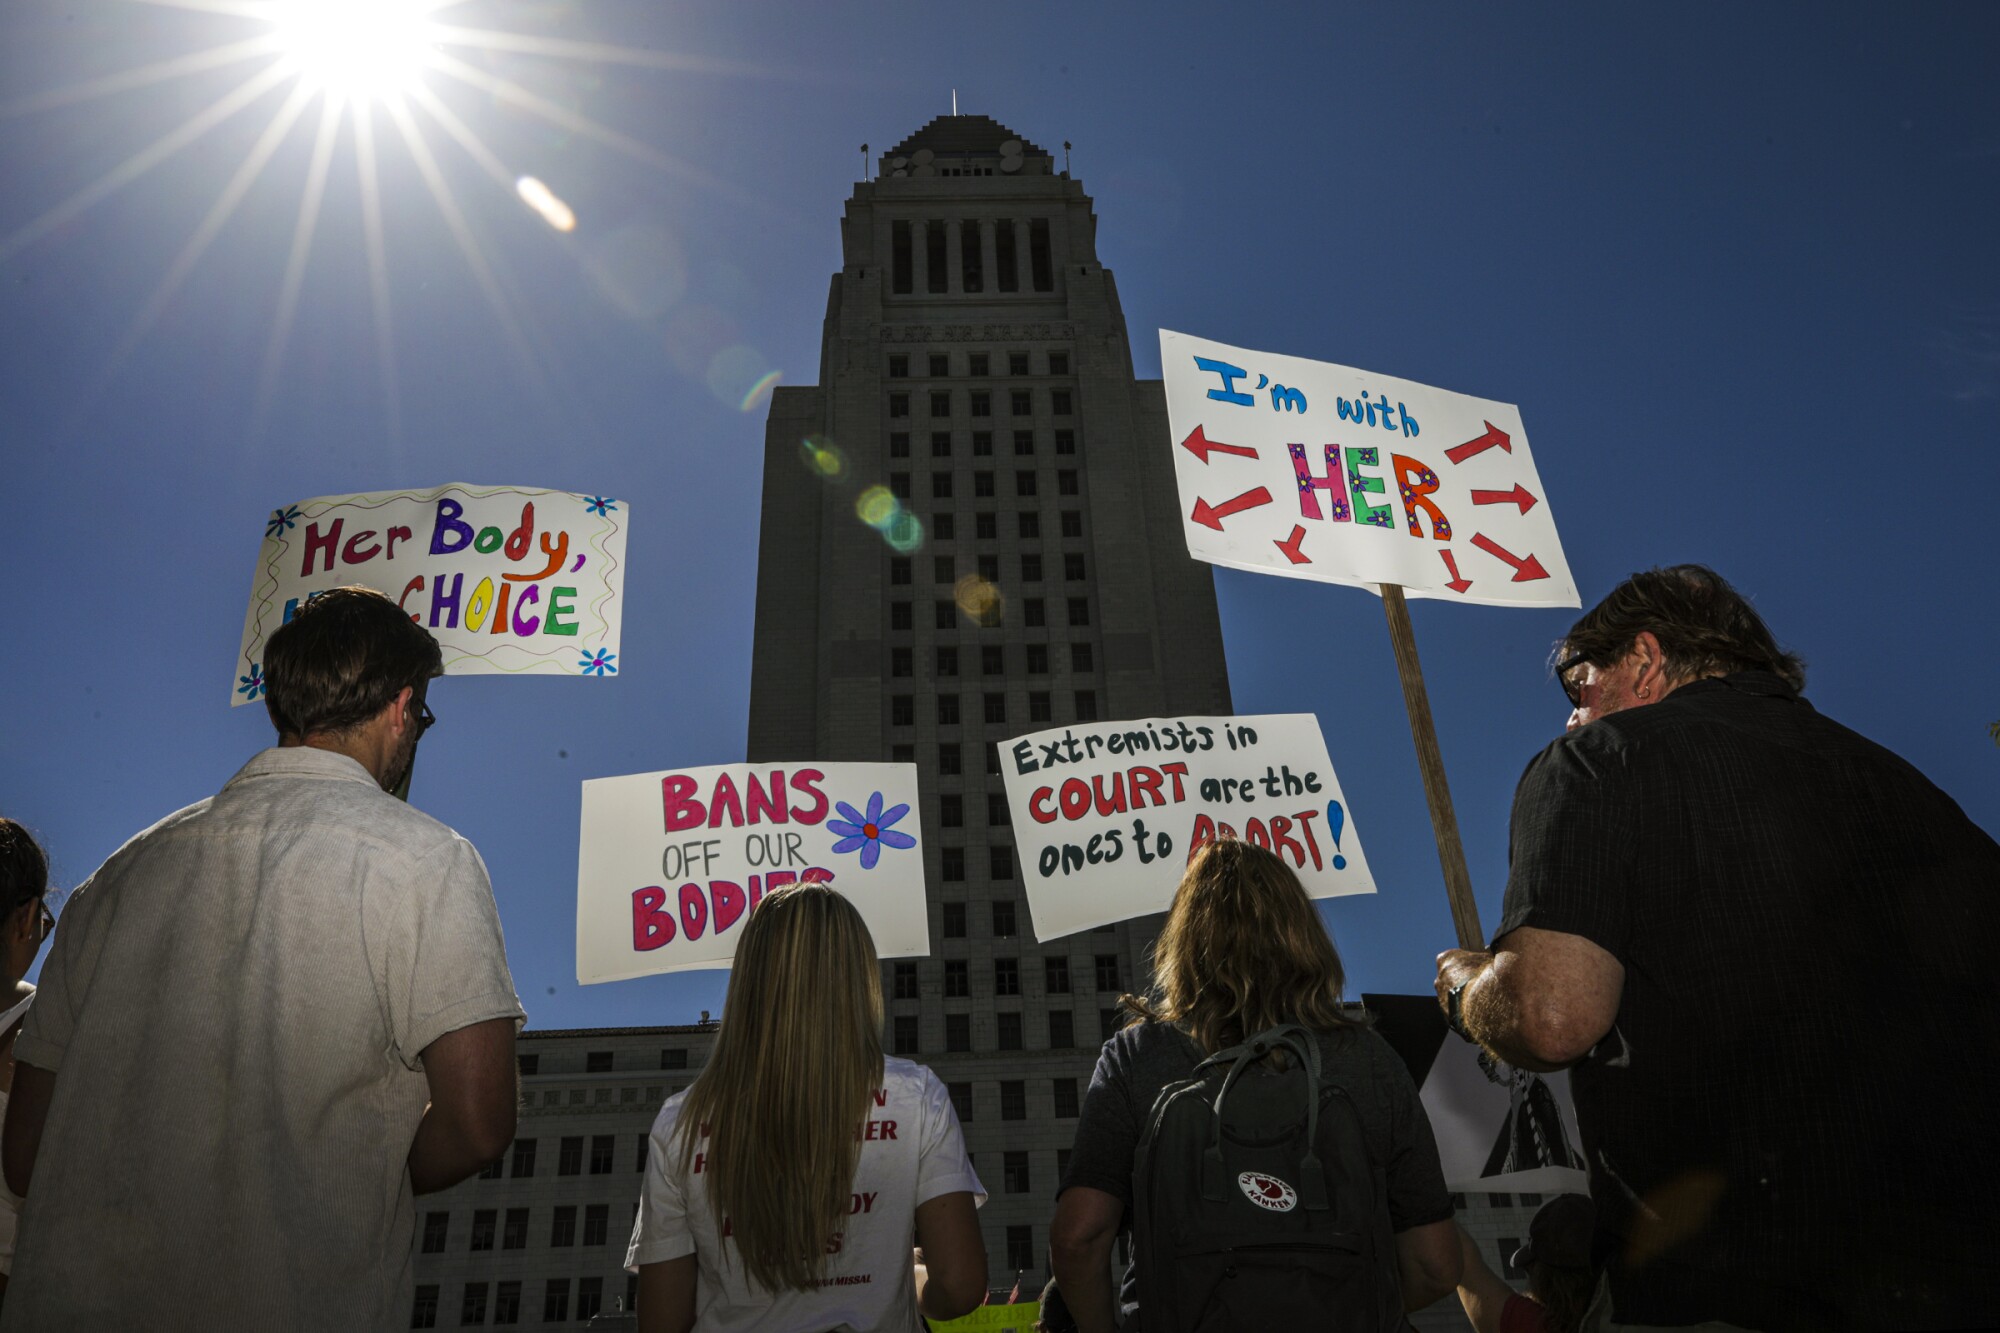 People hold signs at an abortion rights rally in downtown LA that read, "I'm with her" and "Bans off our bodies."